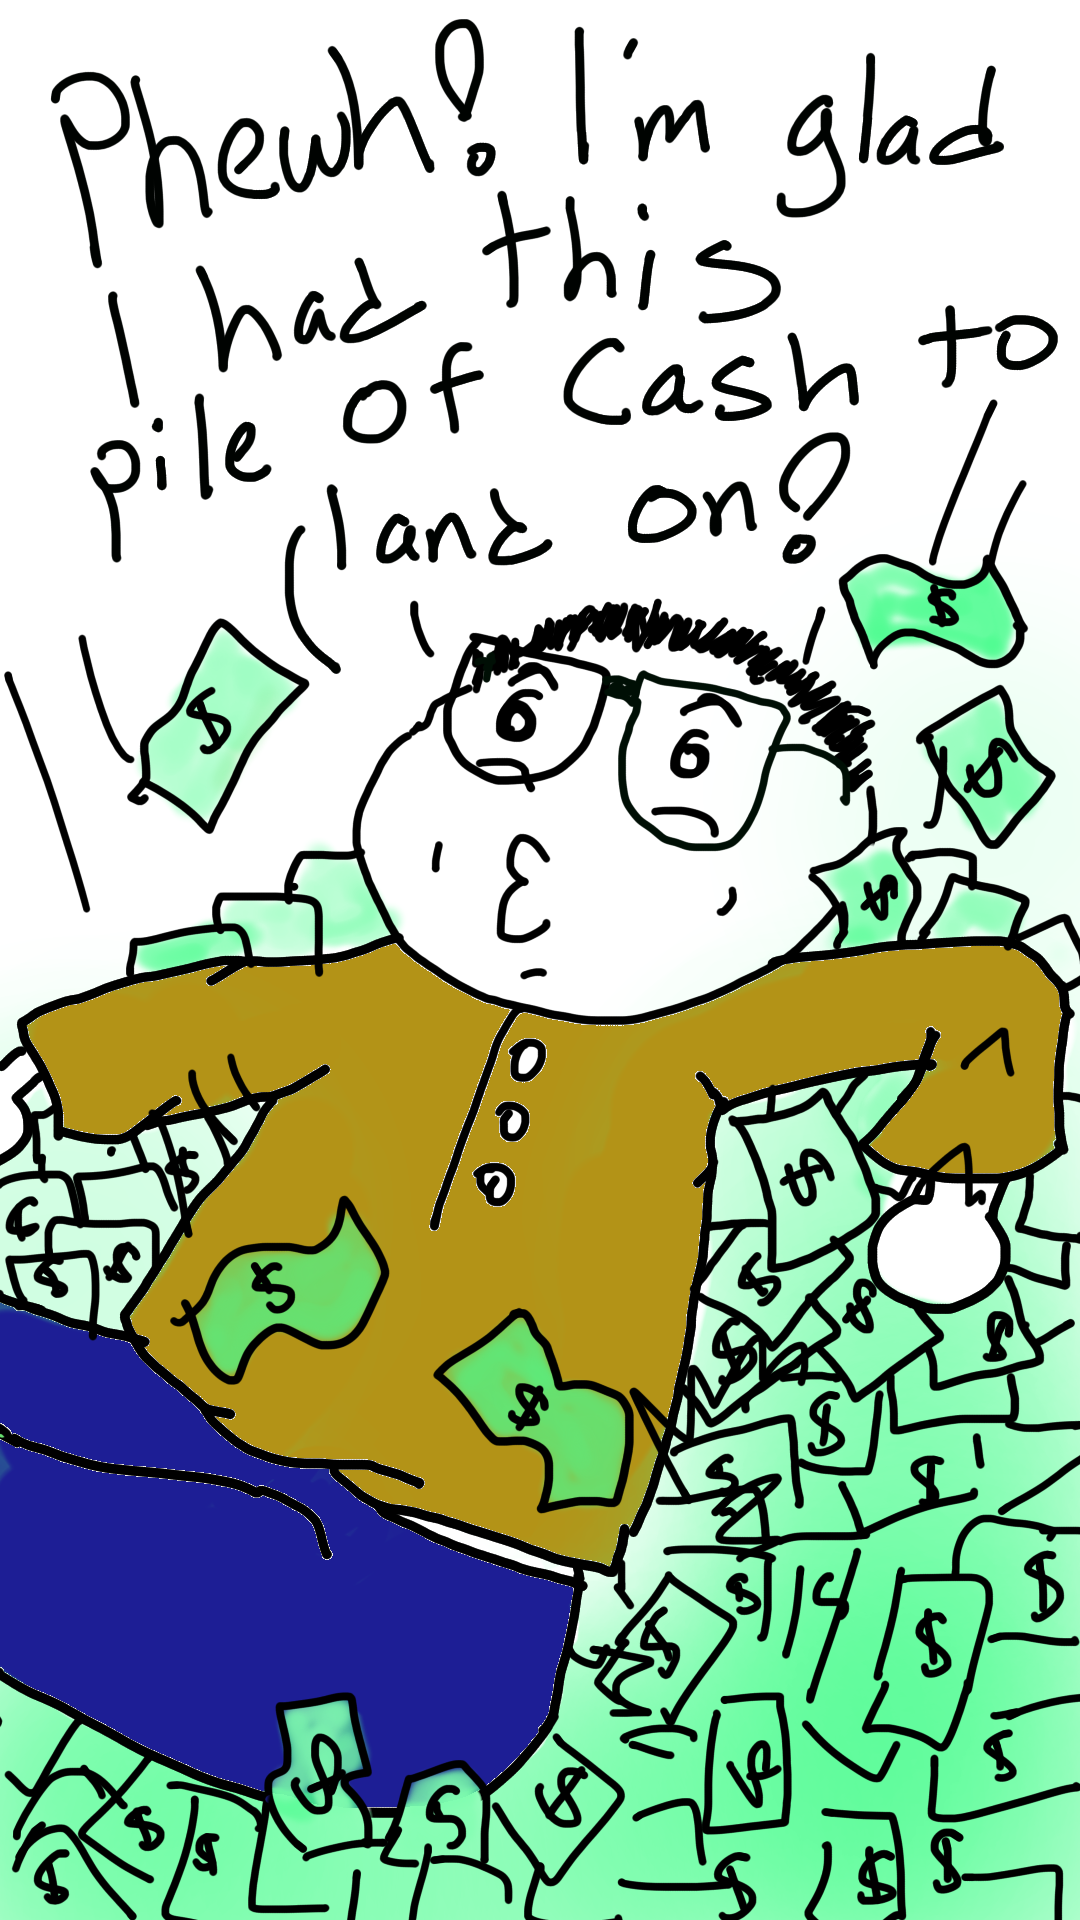 Man lying in front of piles of cash